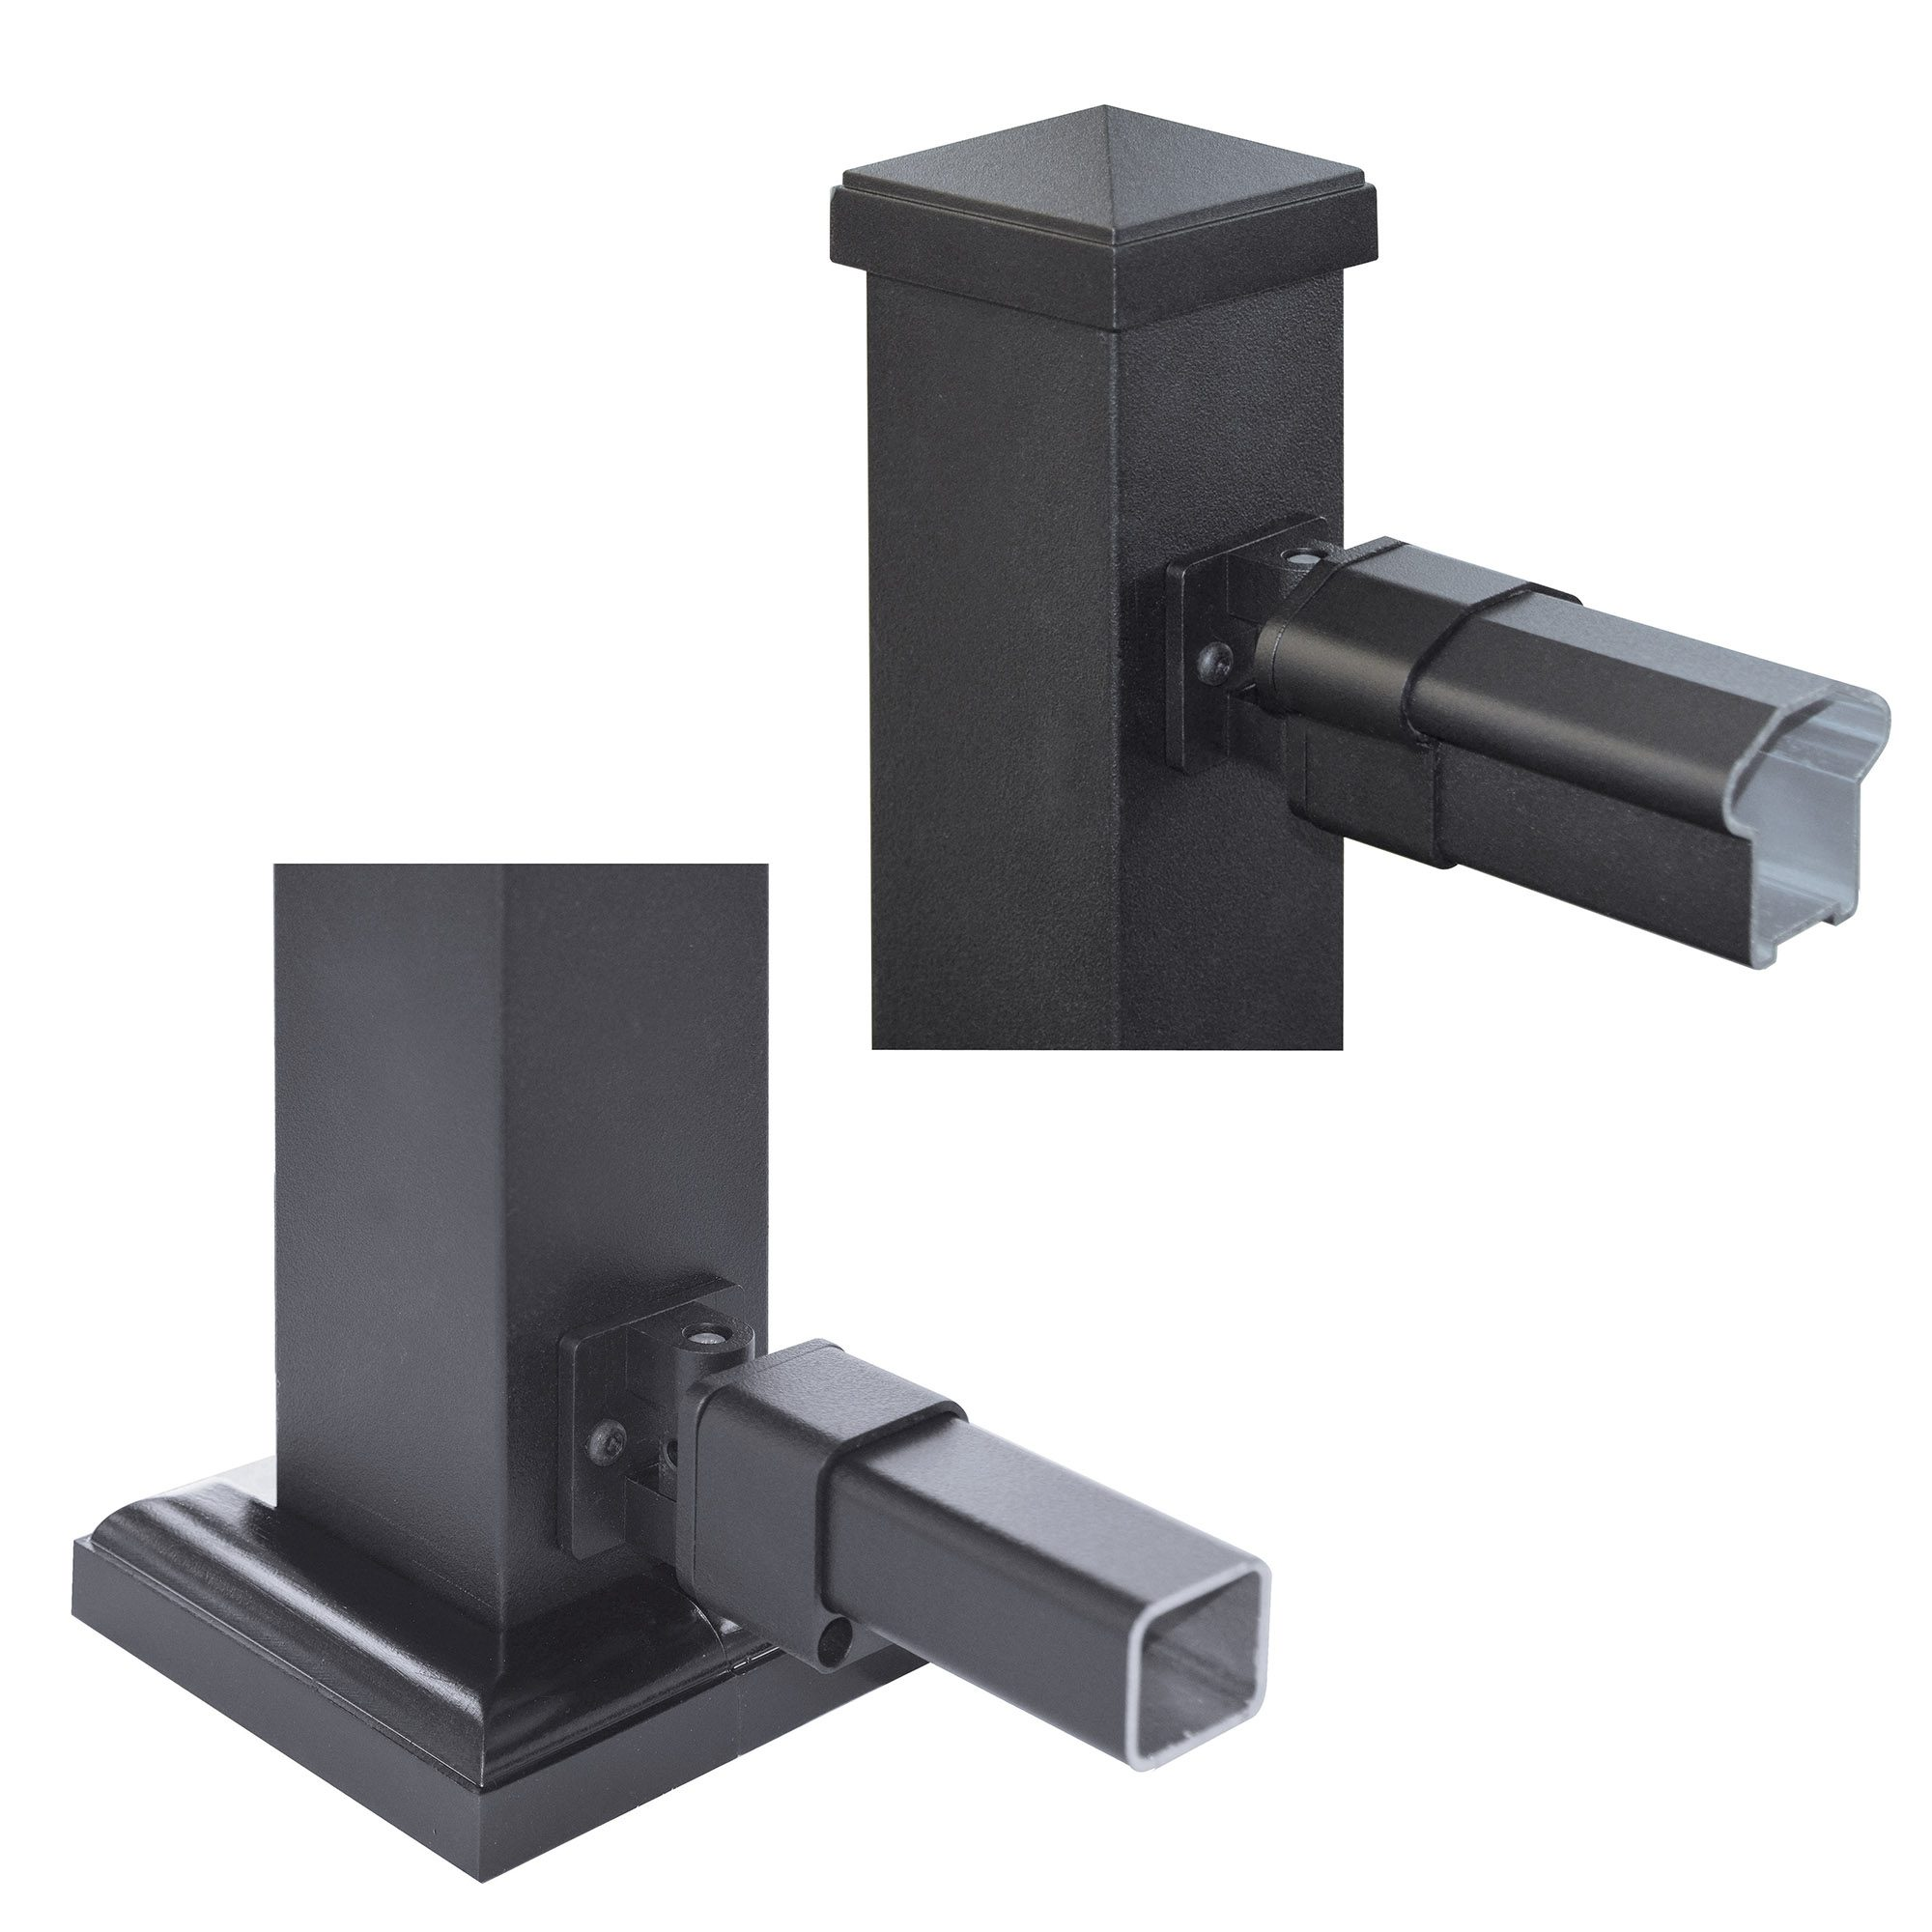 DSRSB-B Side-to-Side Swivel Bracket, Steel, For: Installing Angled Railing Sections to Our Posts